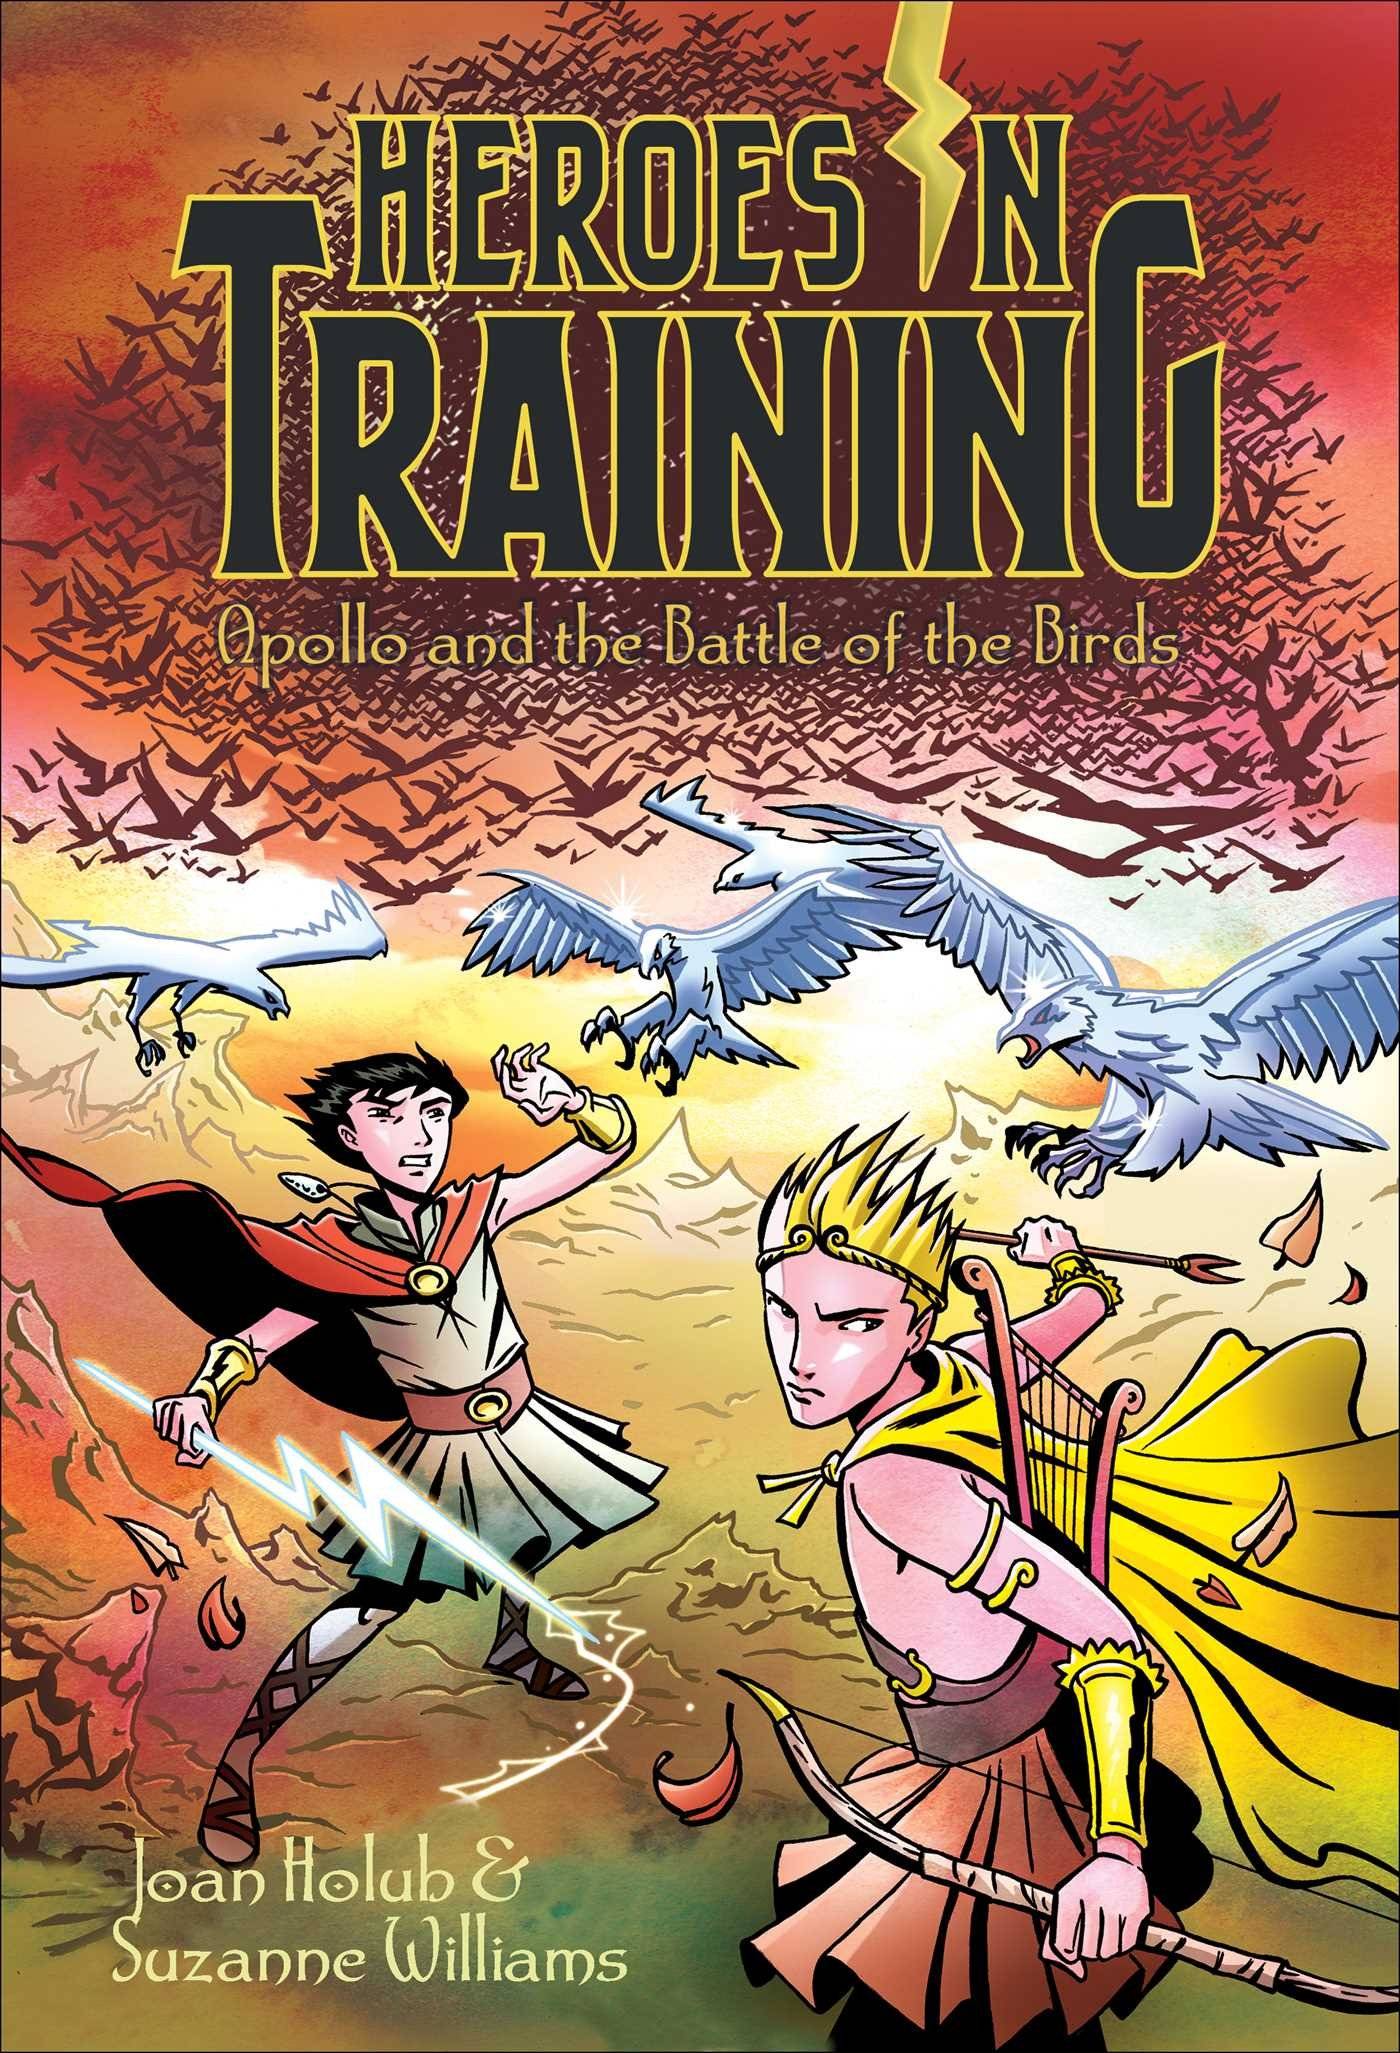 IMG : Heroes in Training Apollo and the Battle of Birds#6